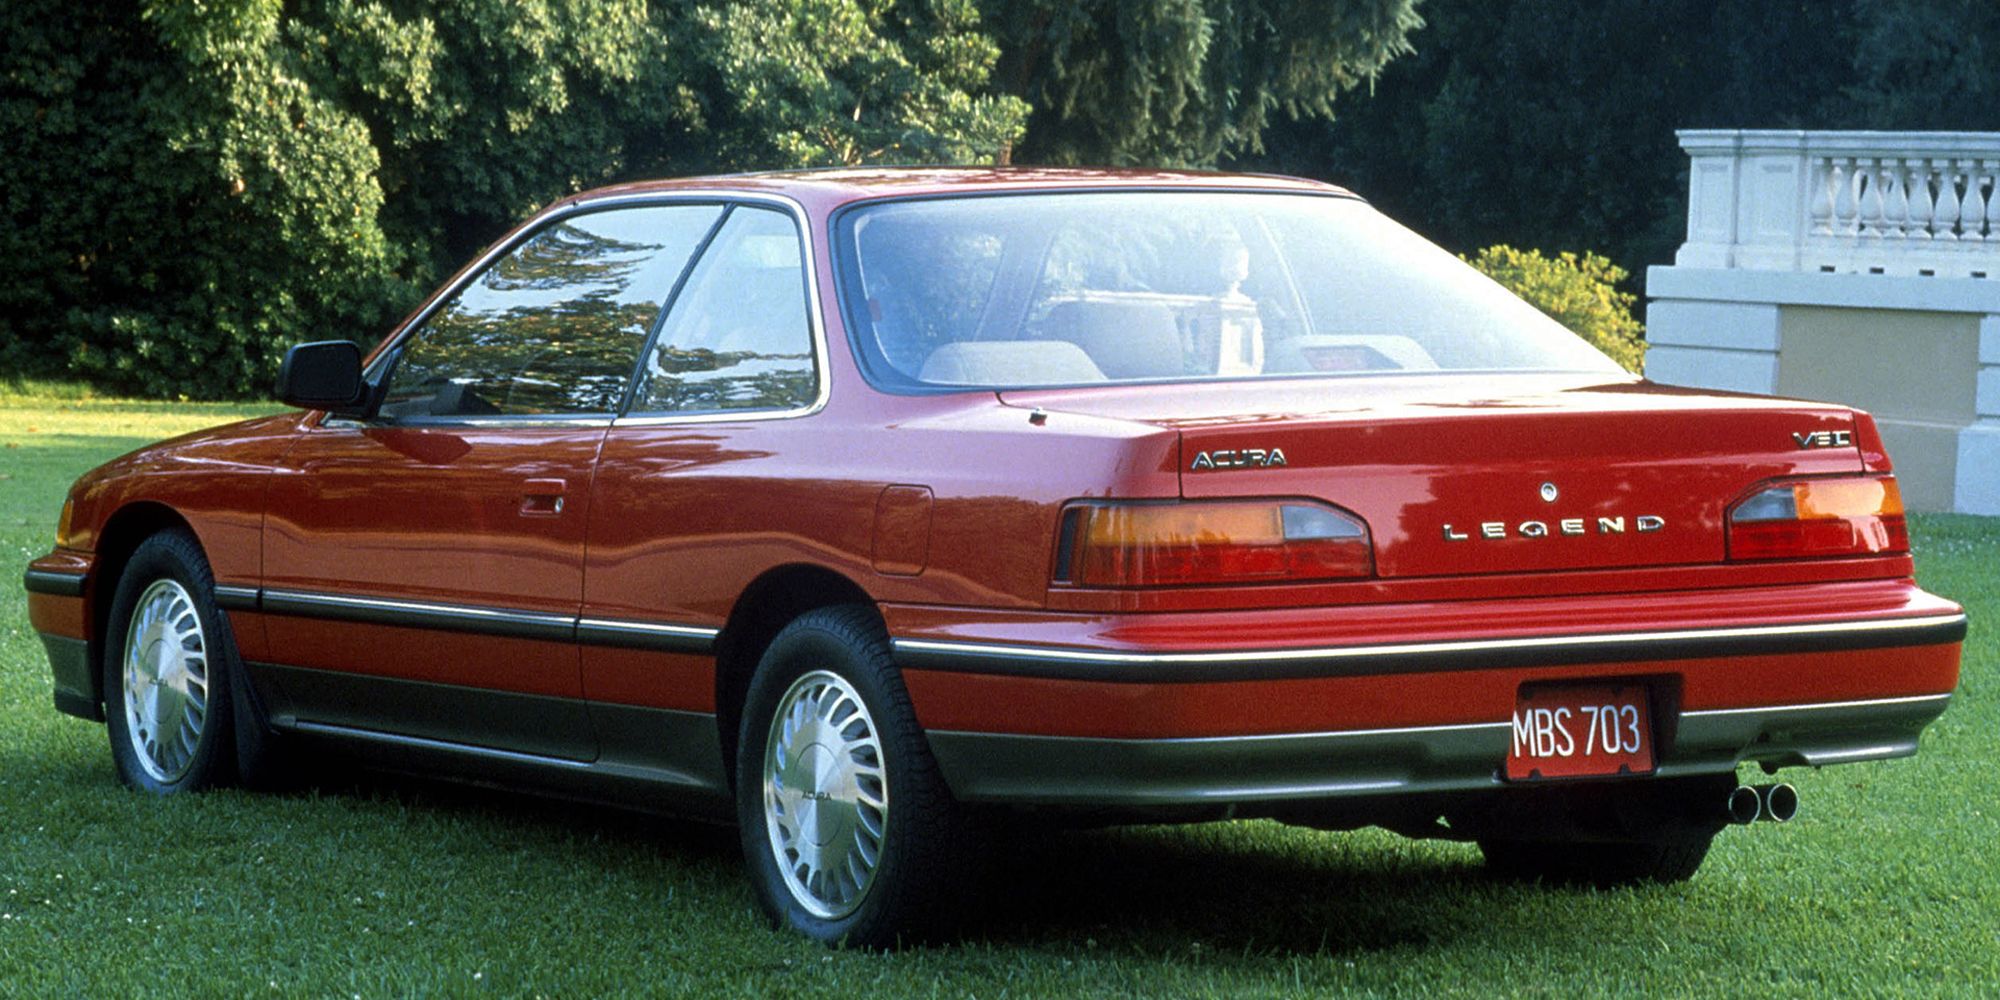 The rear of the first generation Legend Coupe